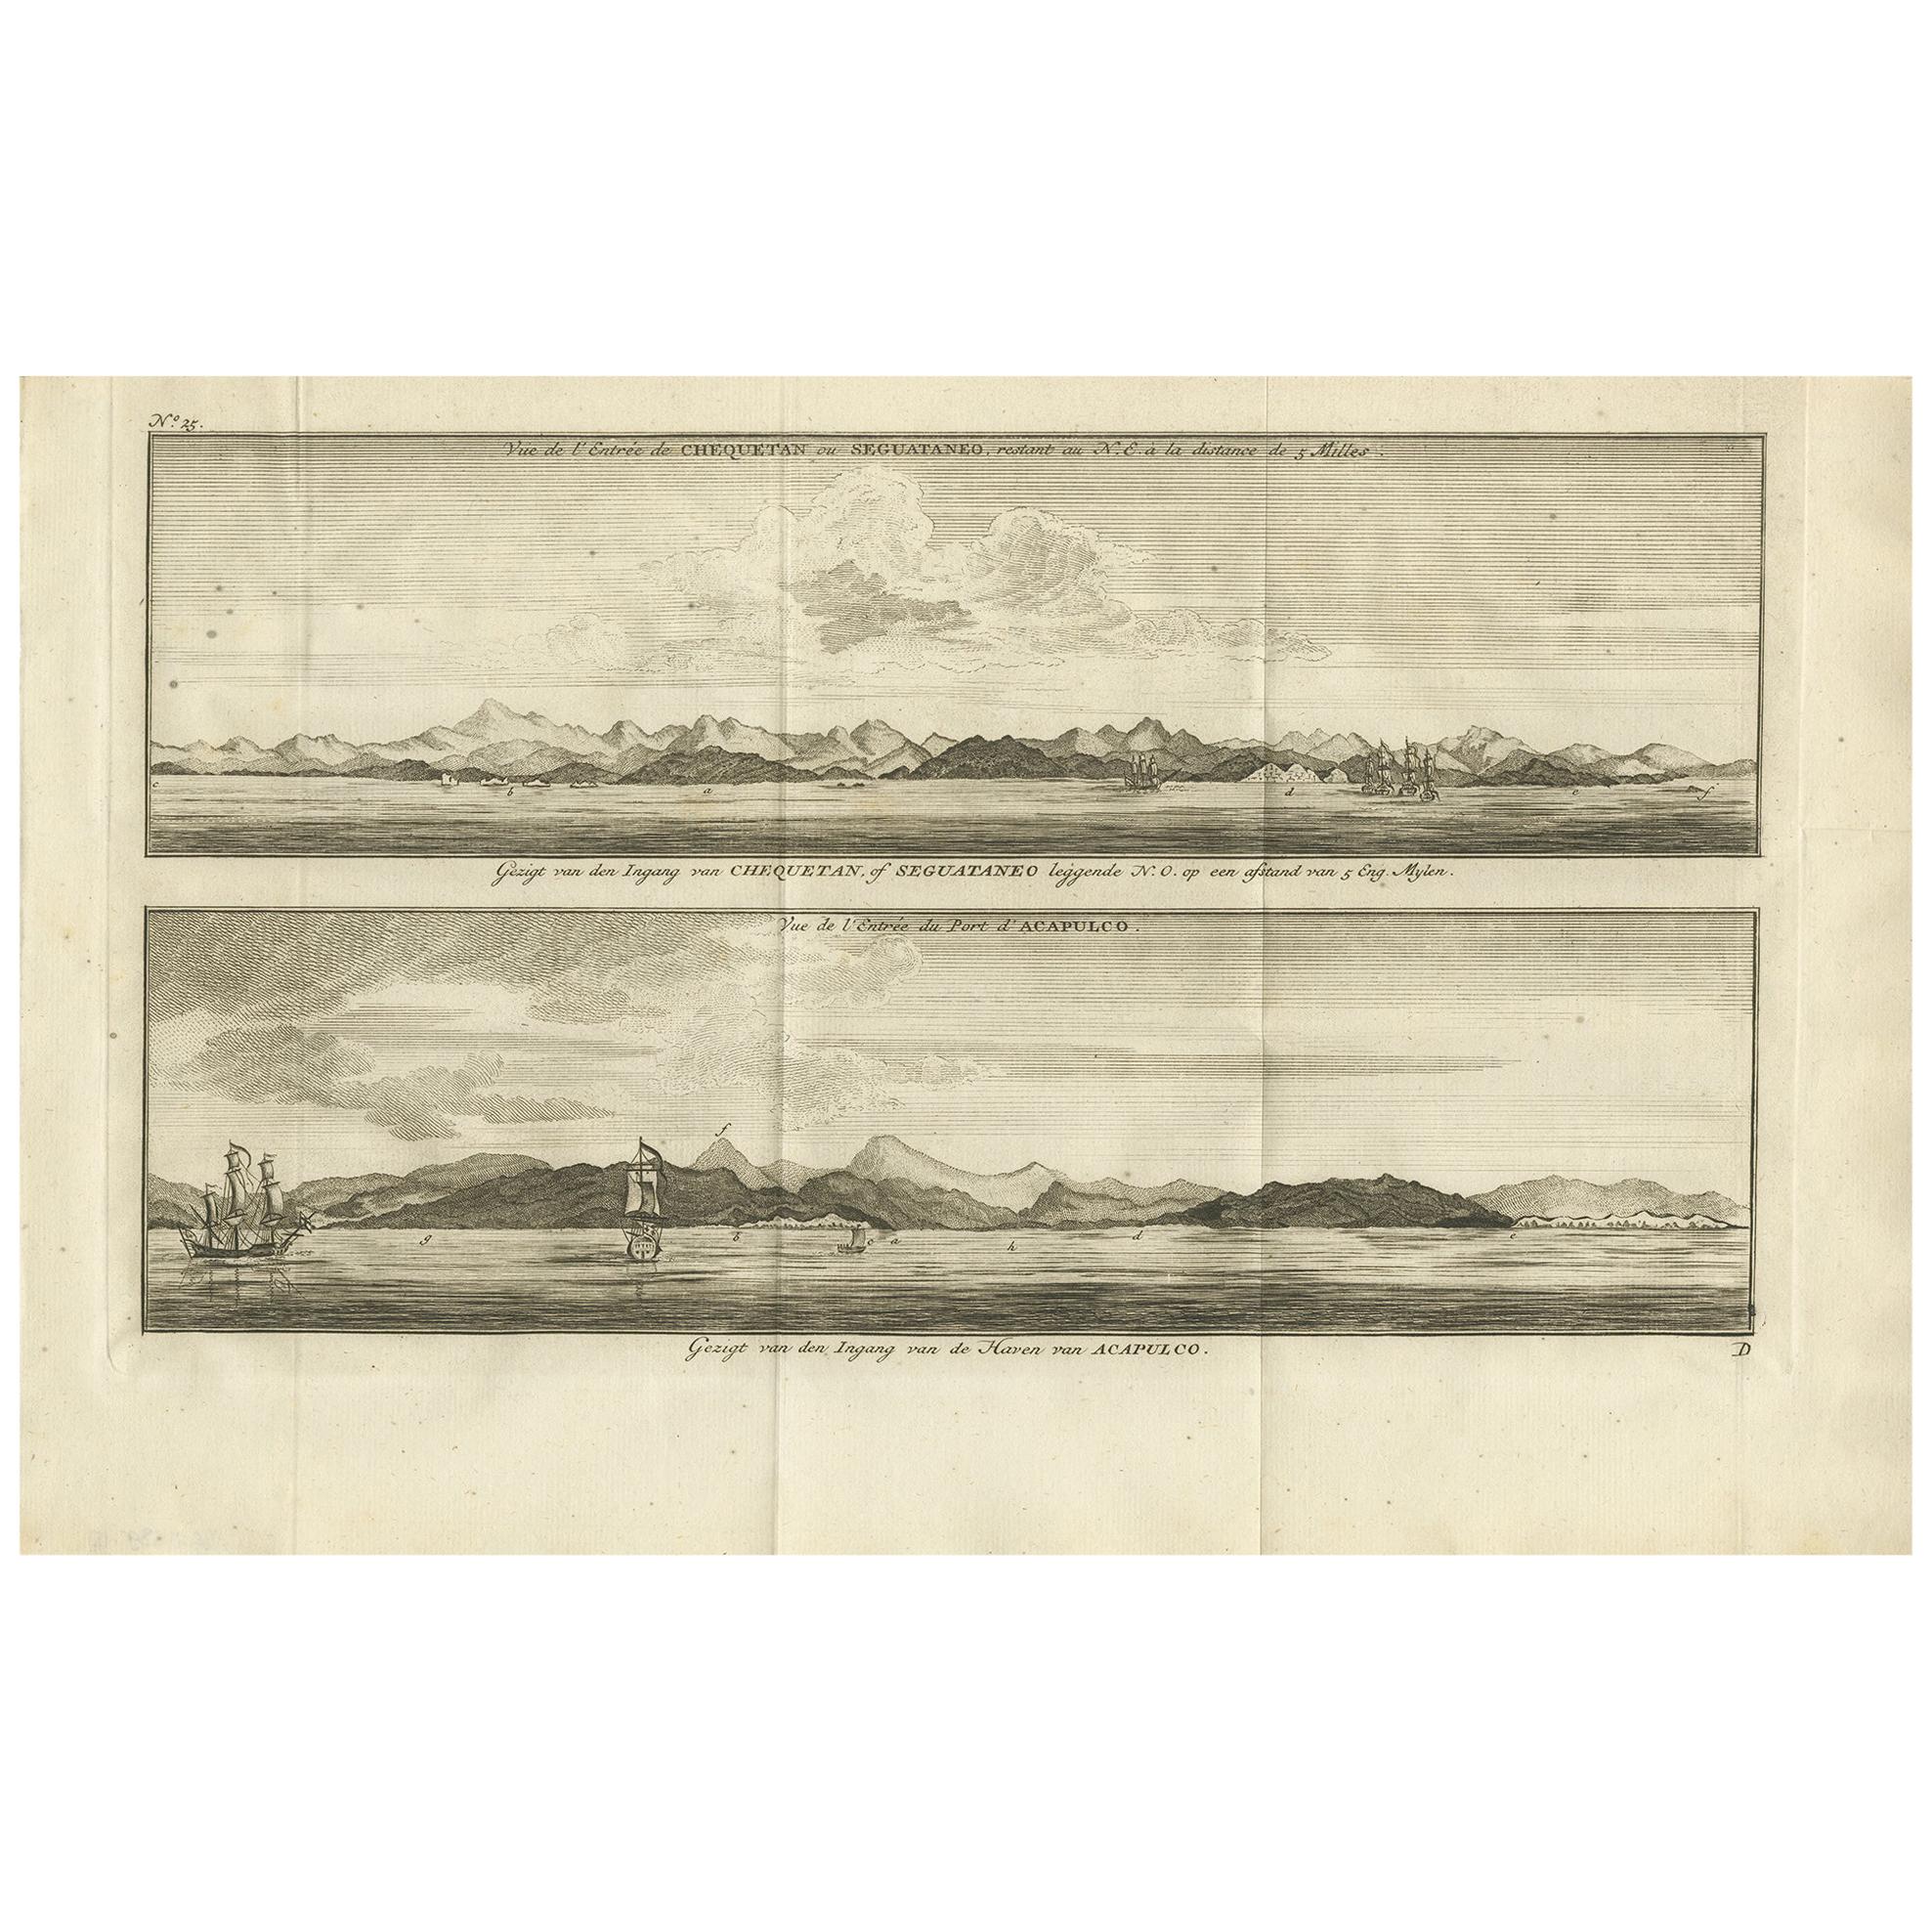 Antique Print of Zihuatanejo and the Harbour of Acapulco by Anson '1749' For Sale